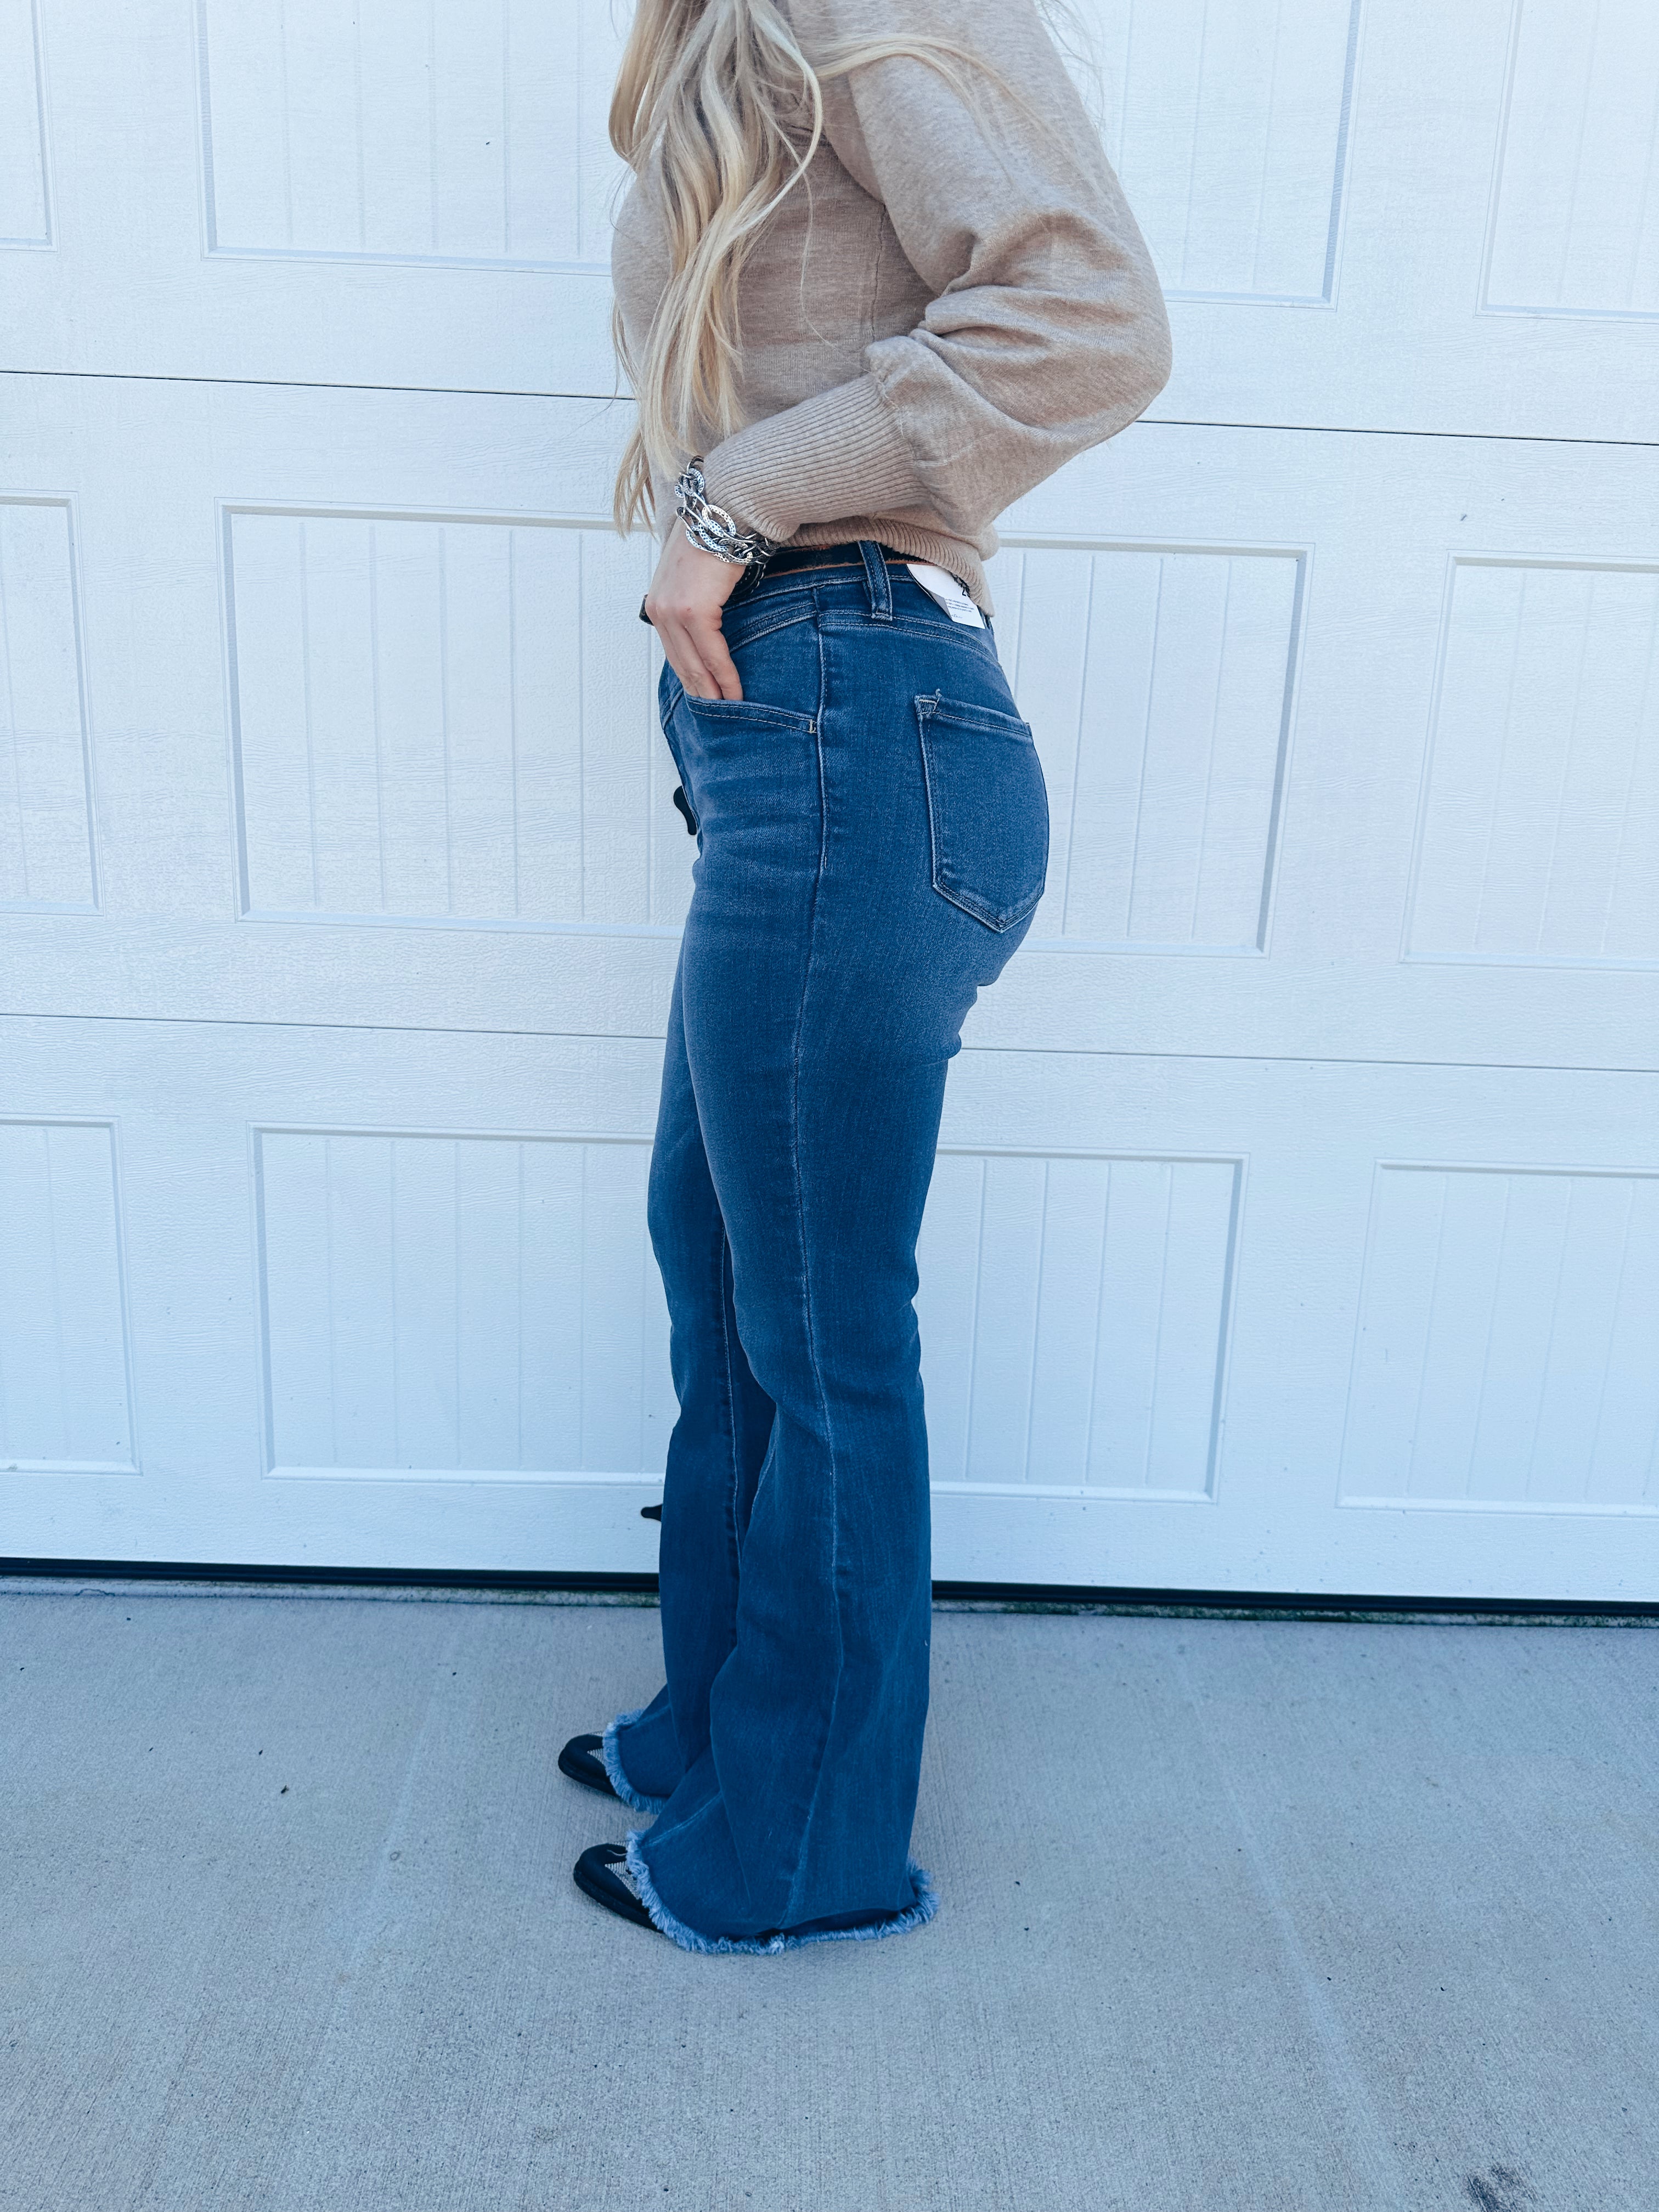 The Serena Jeans